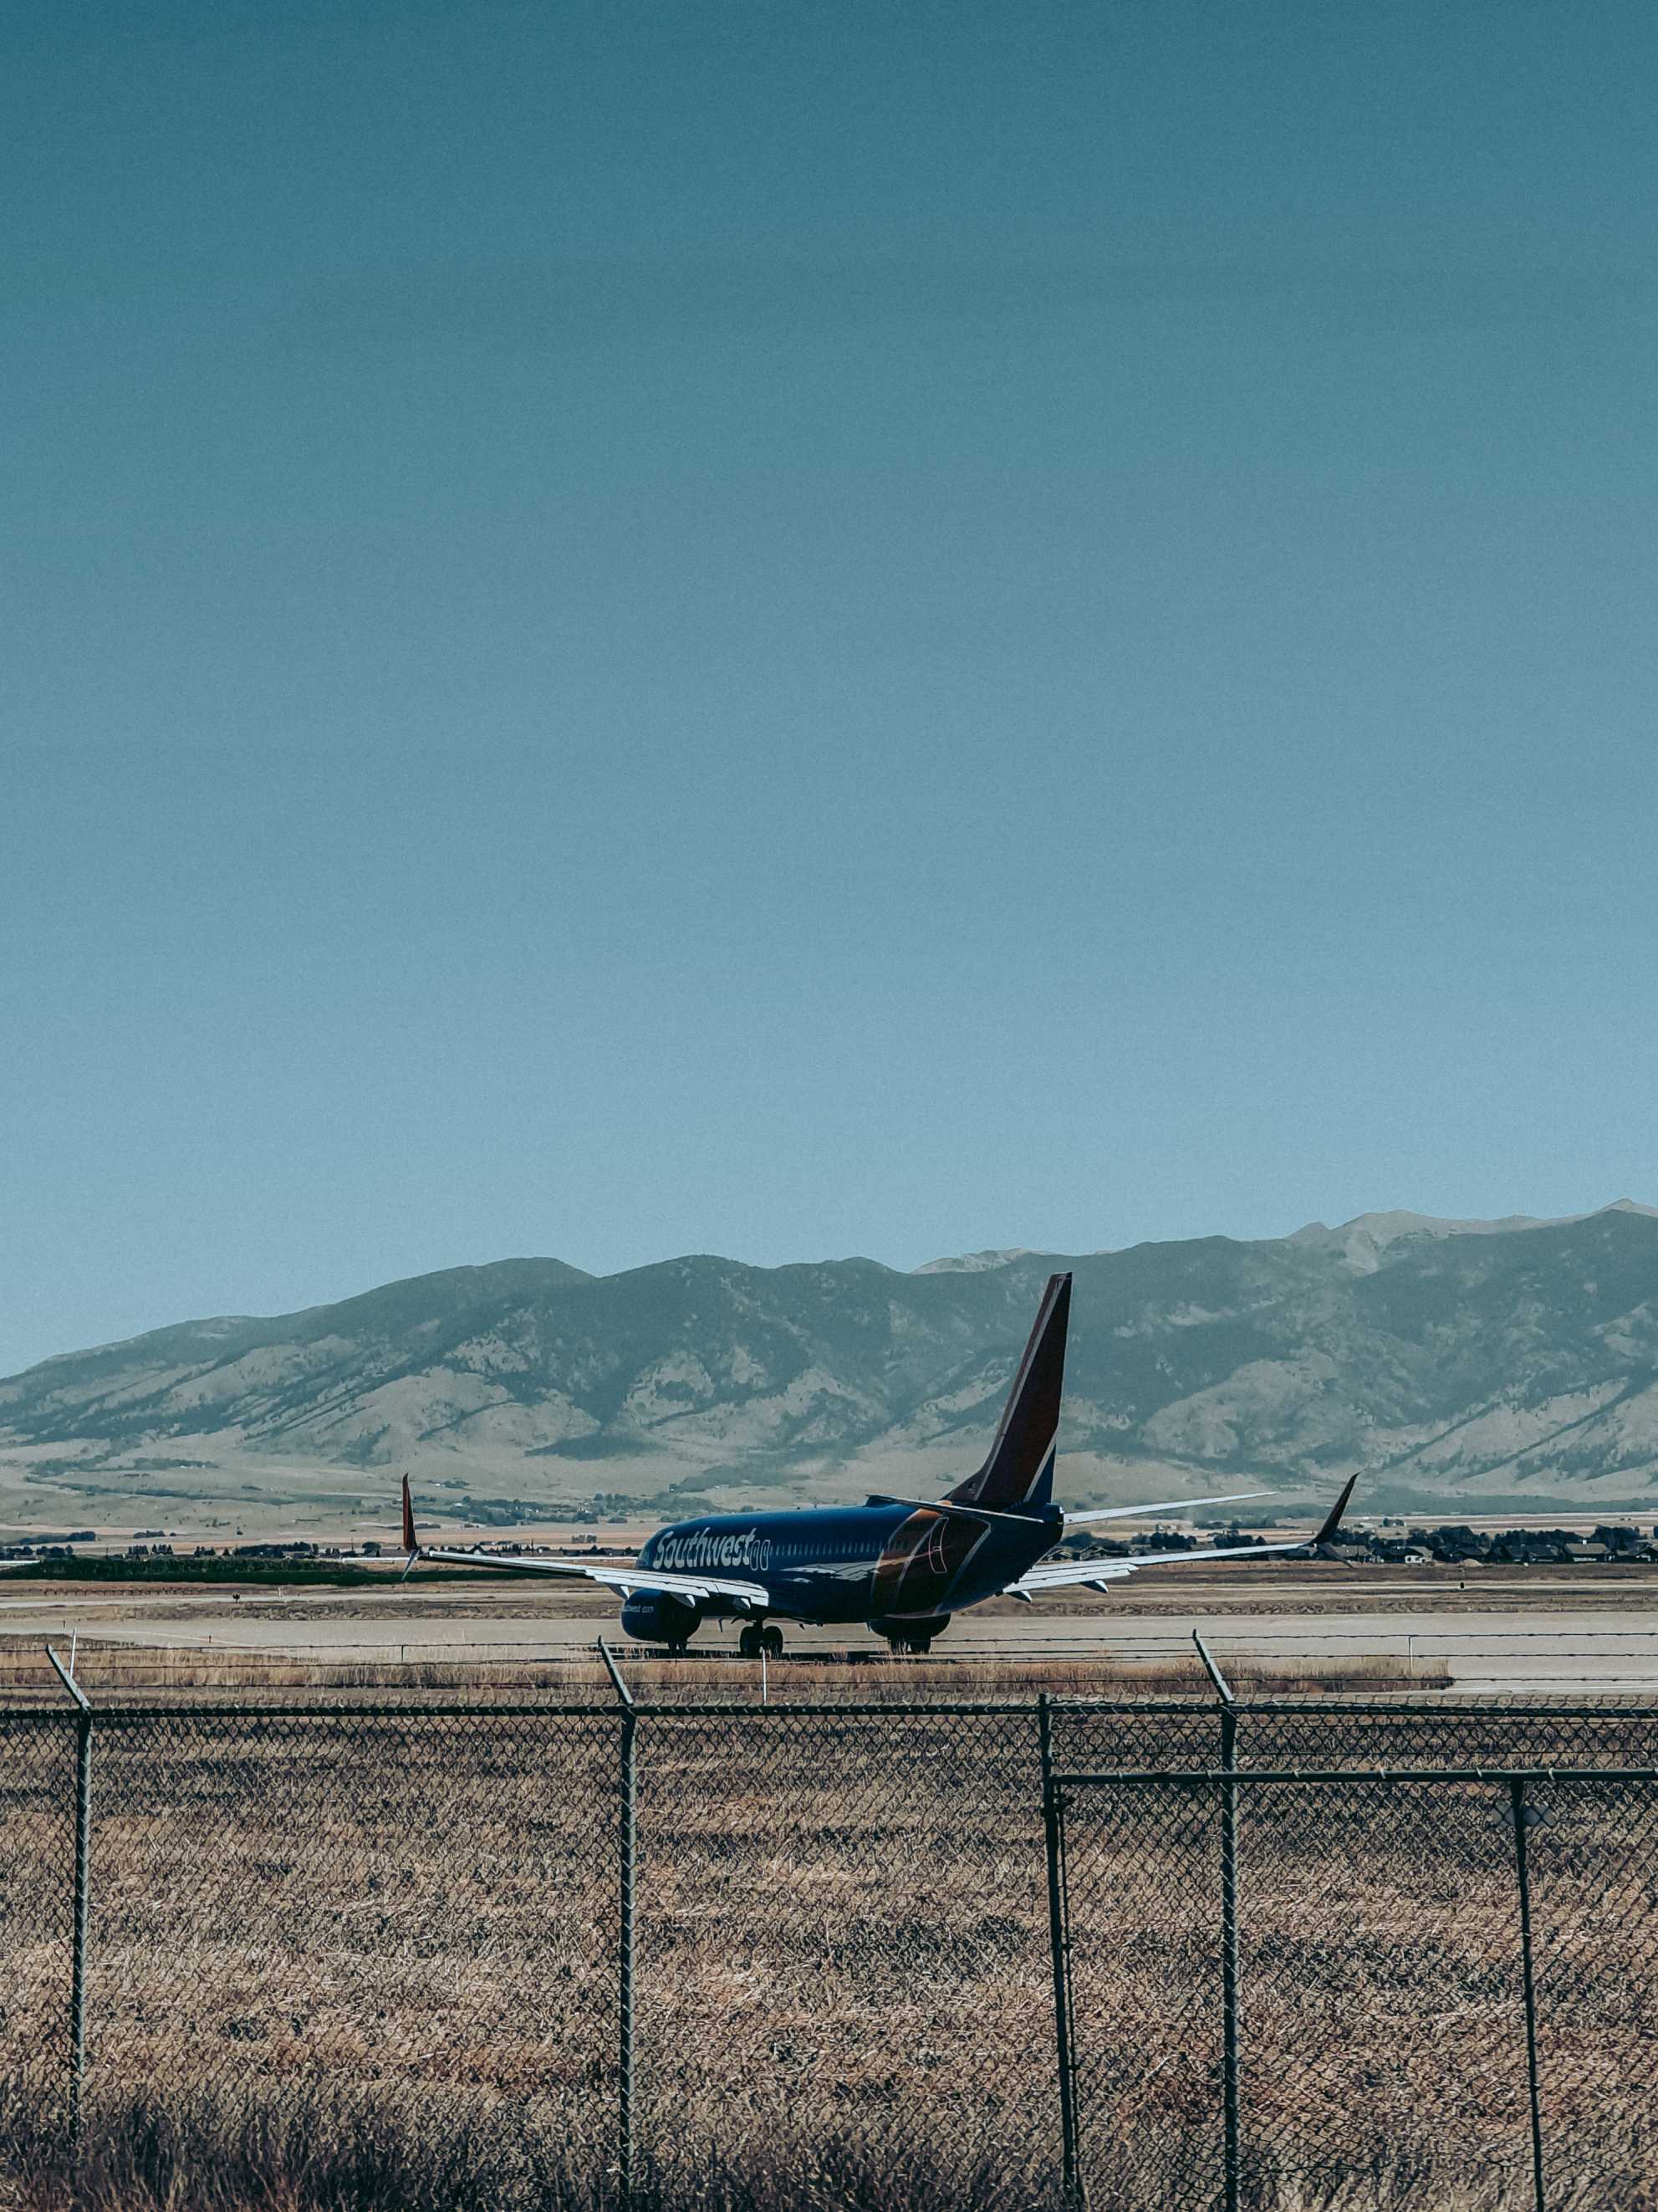 Plane about to take off at Bozeman airport